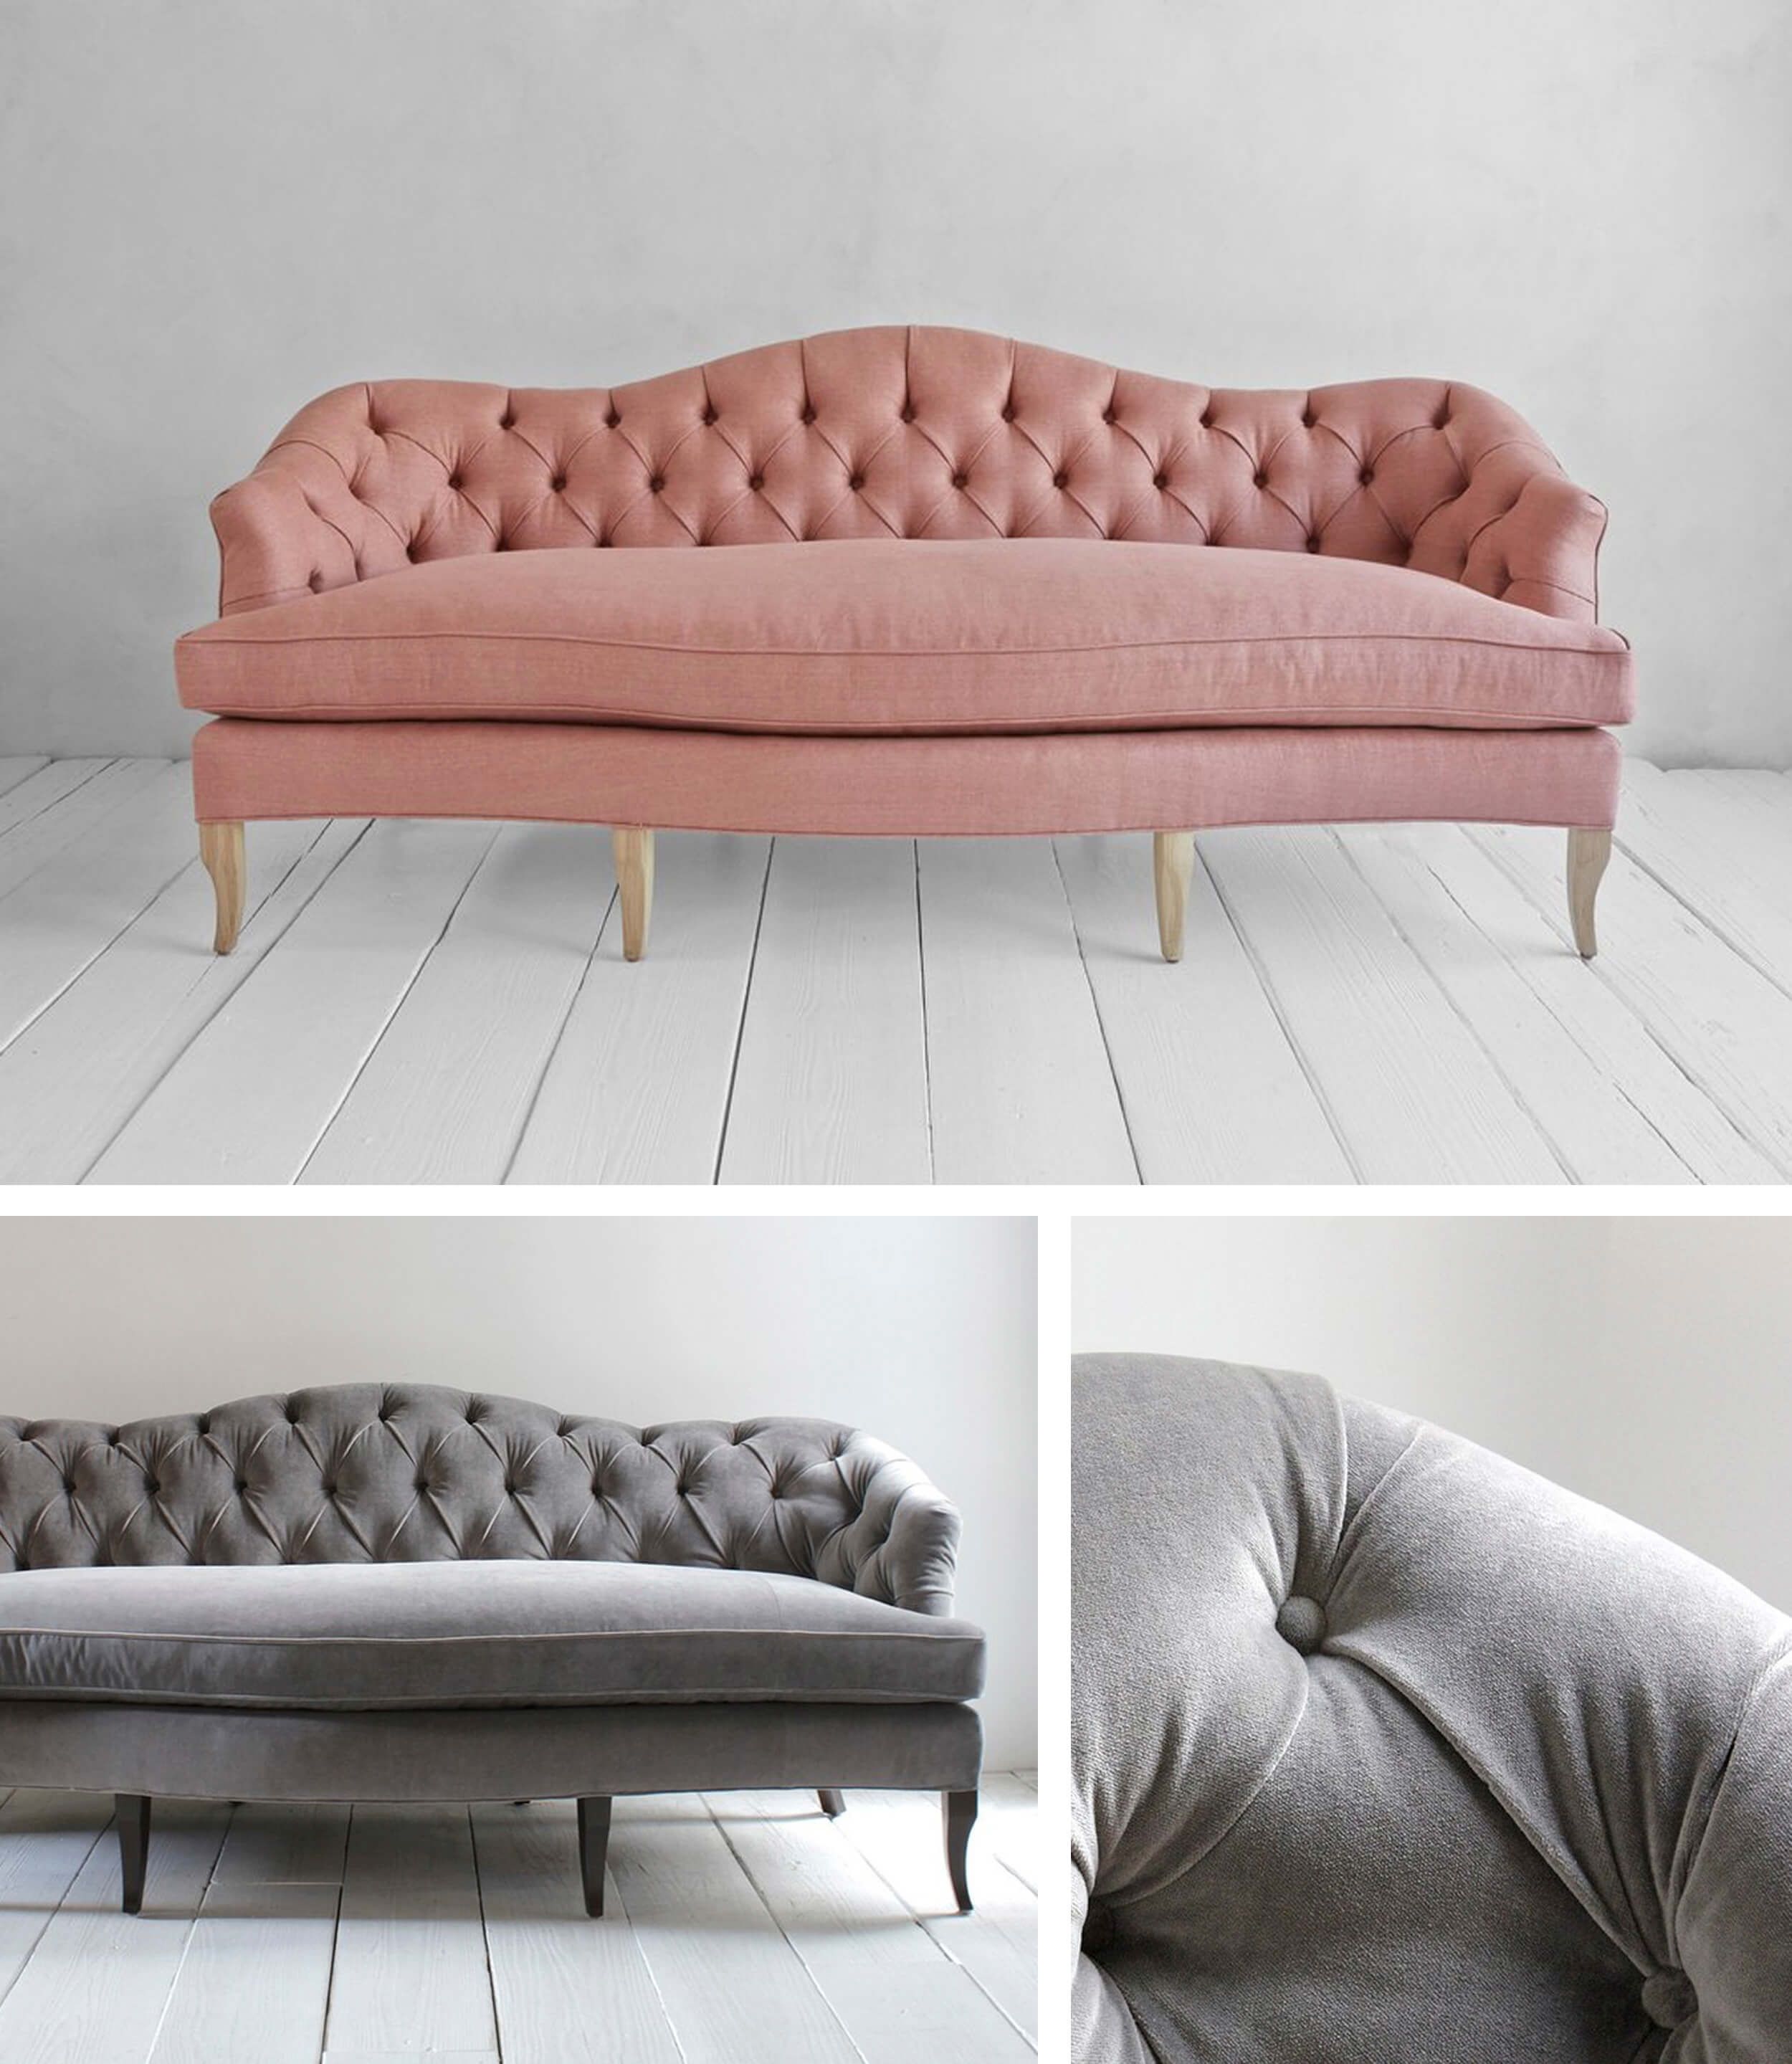 Furniture I Am Coveting For The New House Emily Henderson Regarding Affordable Tufted Sofa (View 9 of 12)